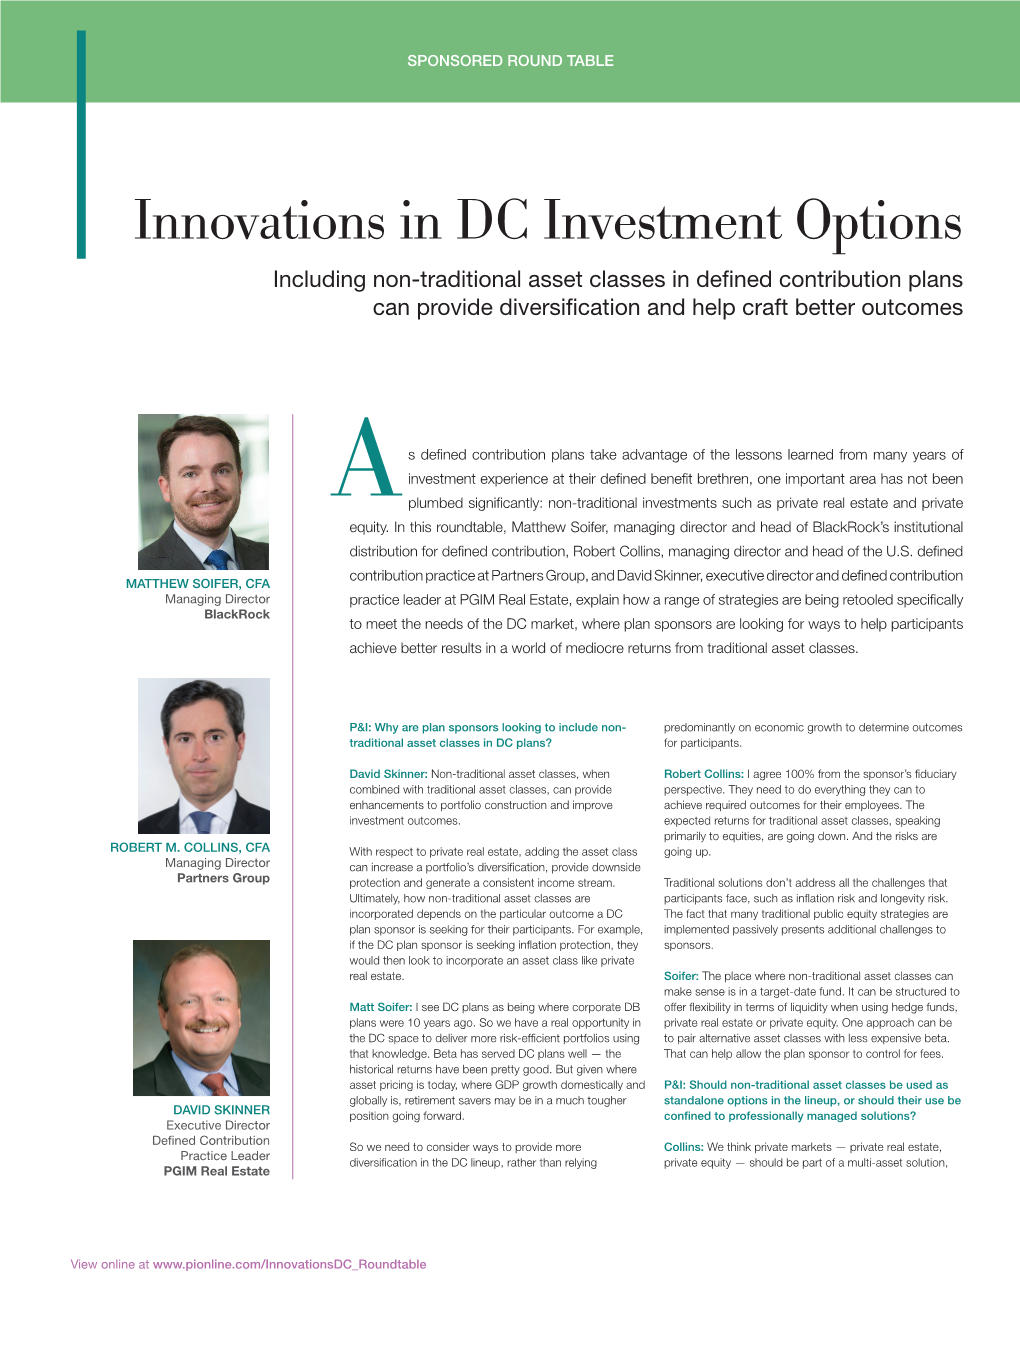 Innovations in DC Investment Options Including Non-Traditional Asset Classes in Defined Contribution Plans Can Provide Diversification and Help Craft Better Outcomes